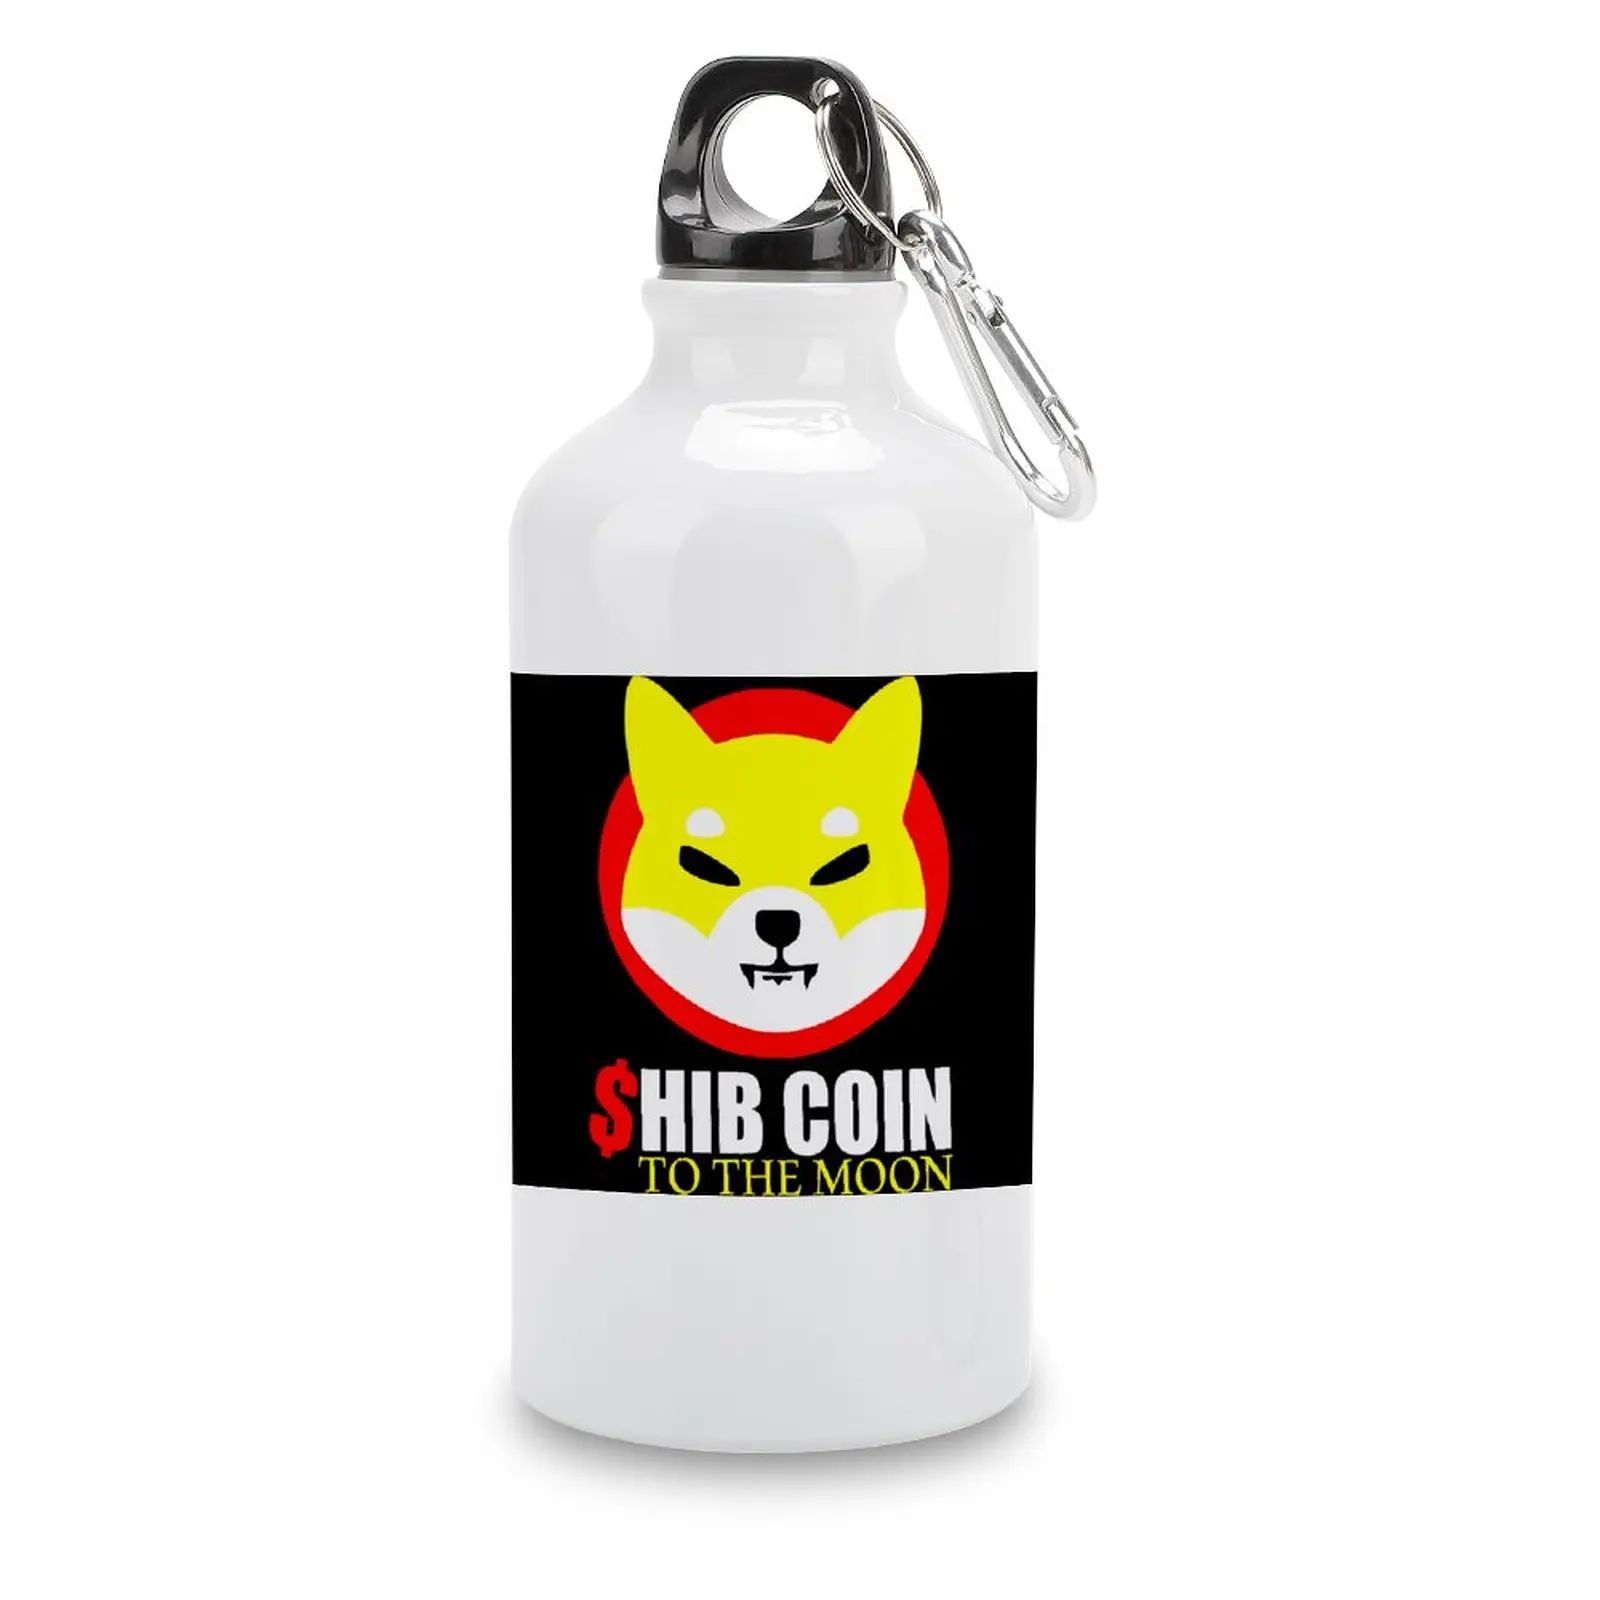 

Shiba Inu Token Crypto Shib Coin To The Moon Cryptocurrency DIY Sport Bottle Aluminum Vintage Kettle Beer Mugs Vacuum Flask Fun